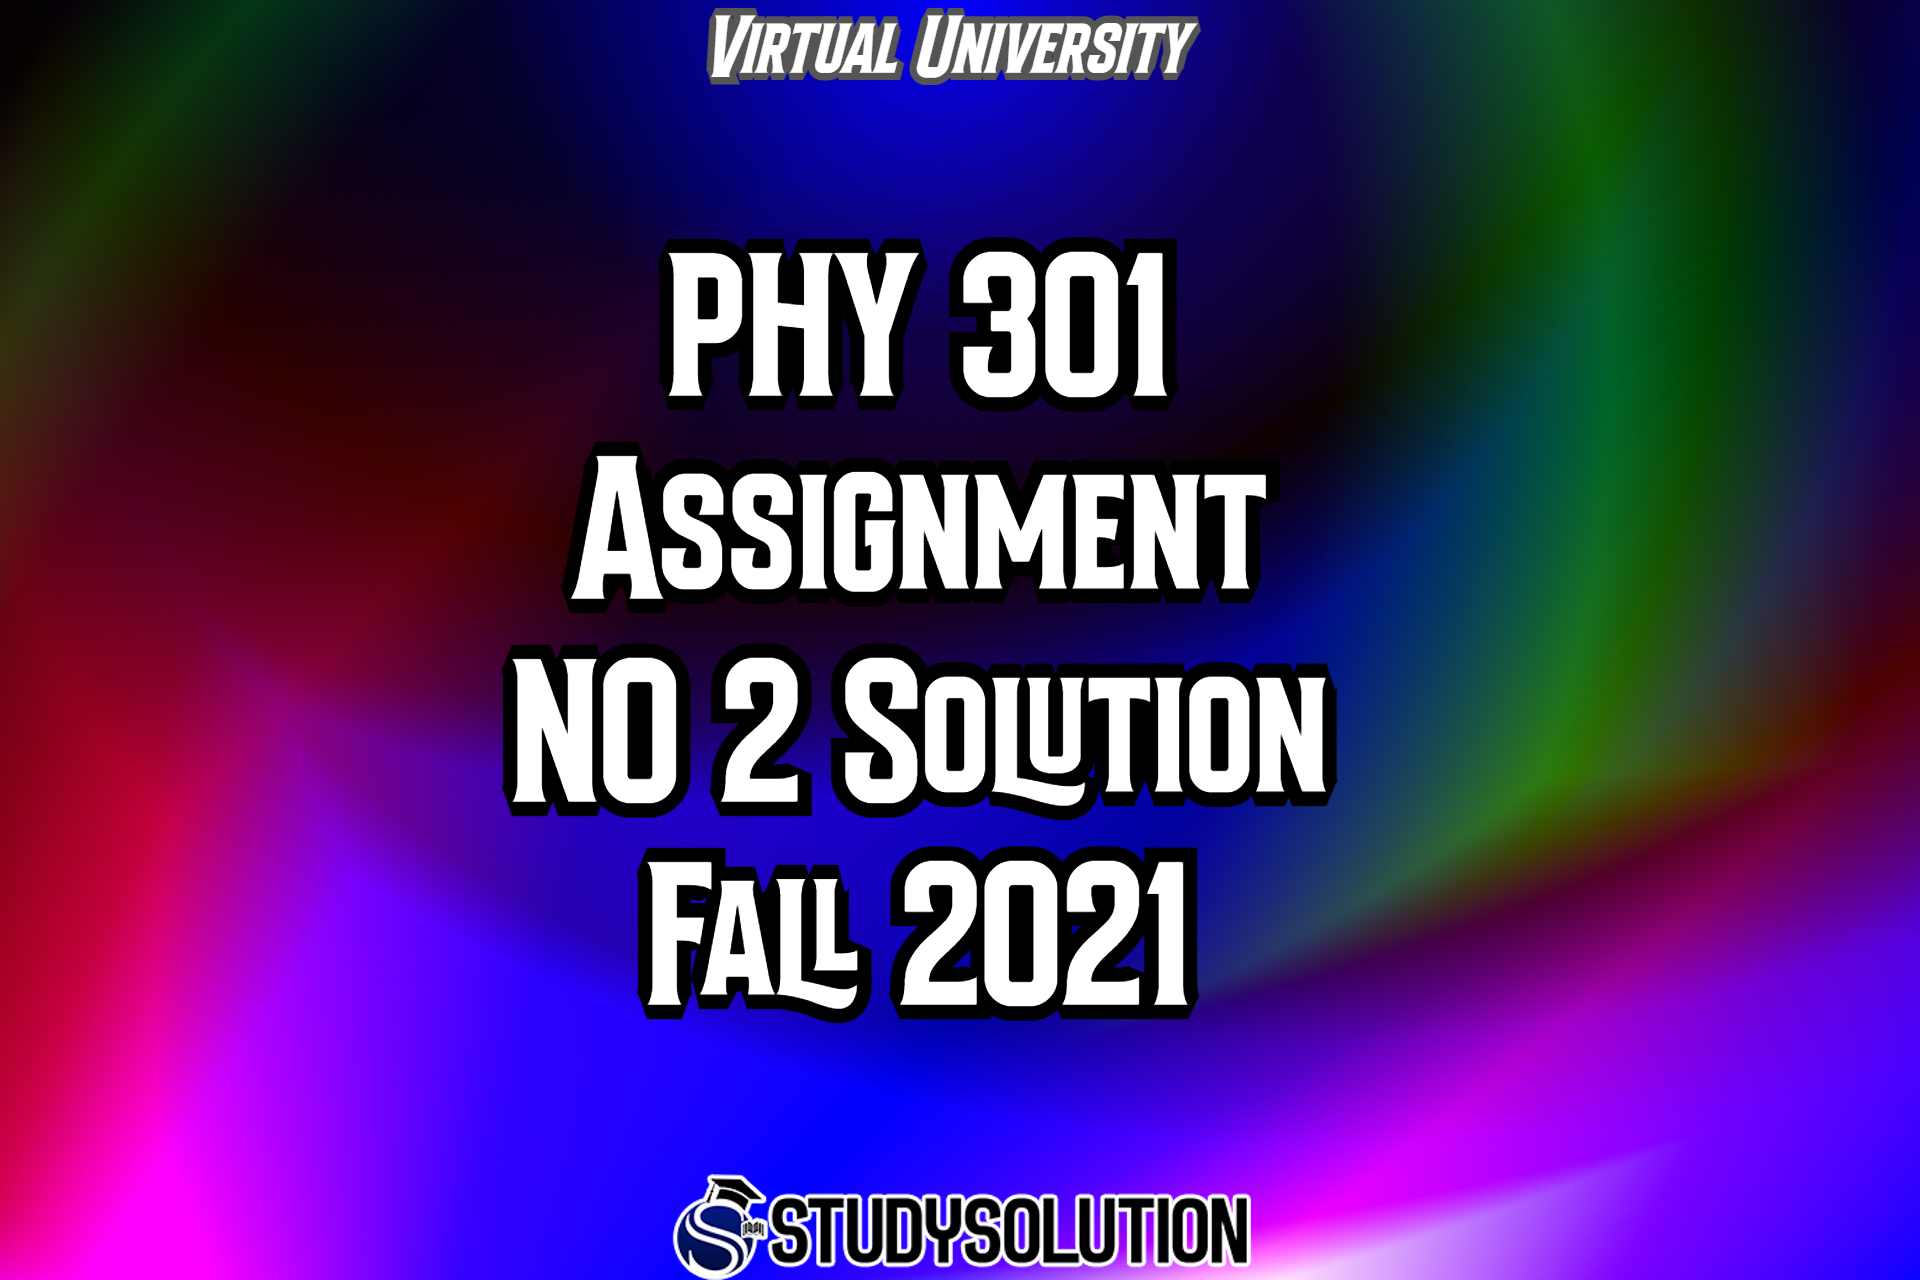 PHY301 Assignment No 2 Solution Fall 2021